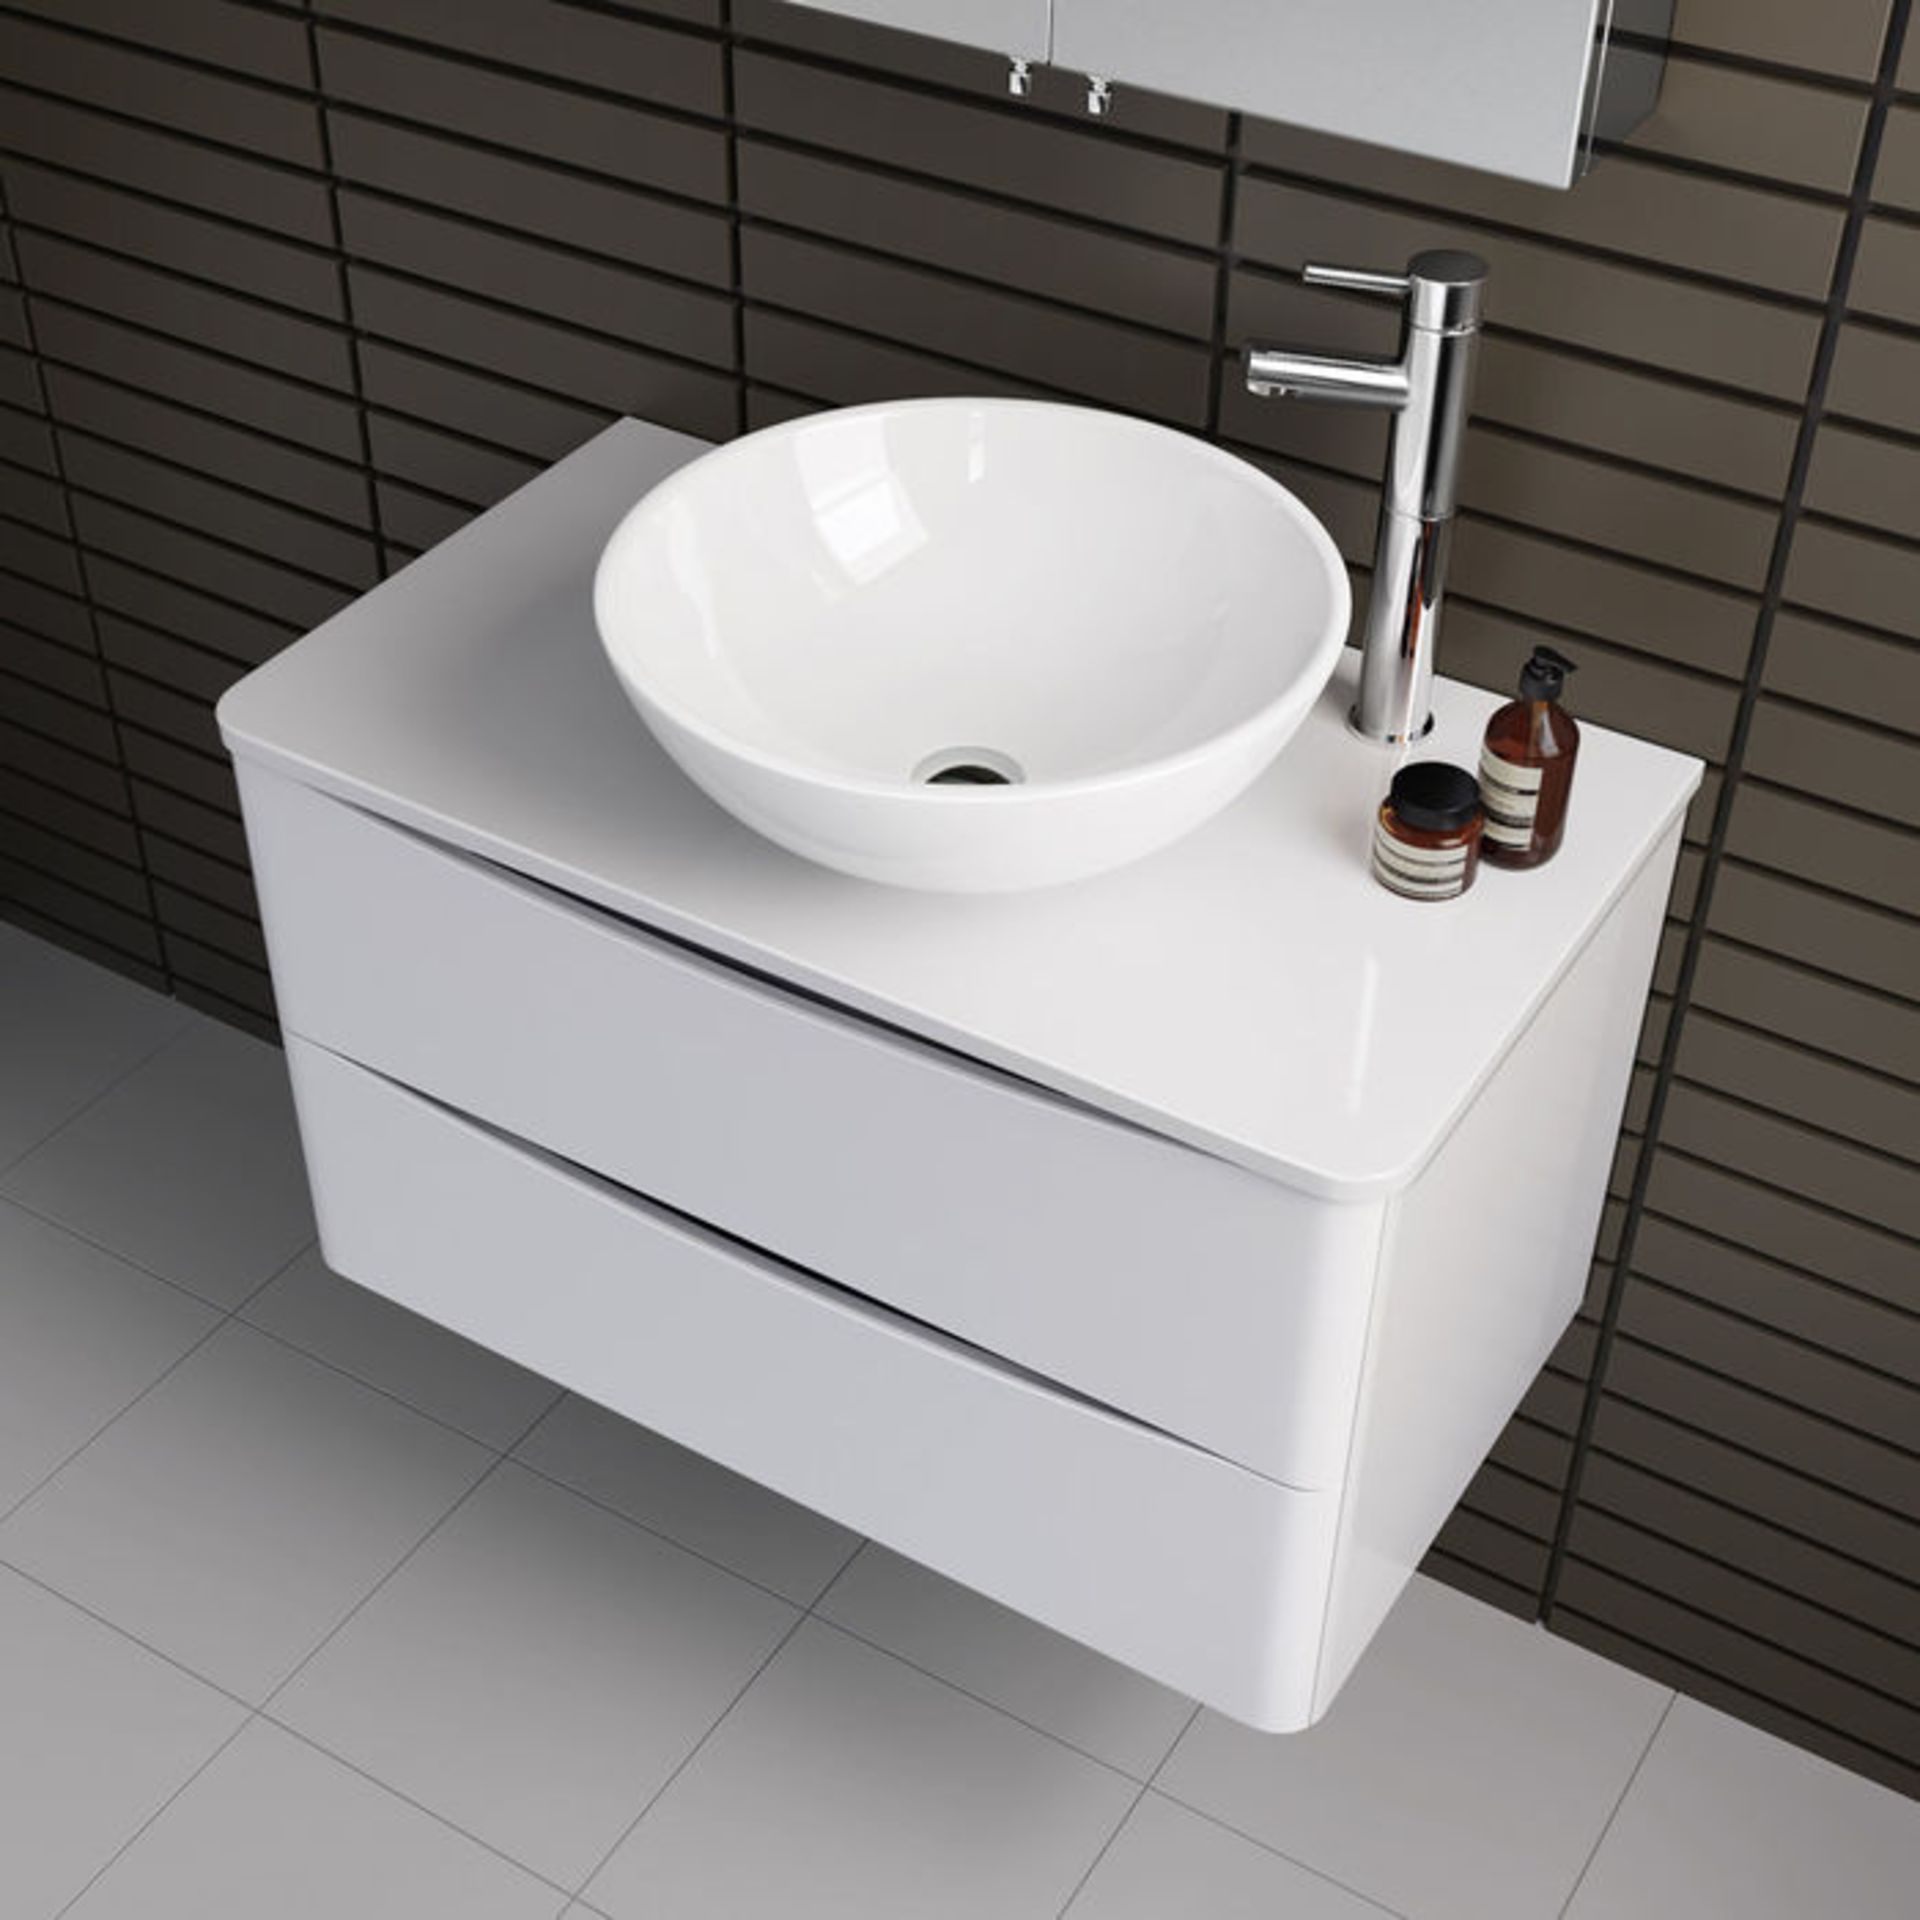 (OS42) 800mm Austin II Gloss White Countertop Unit and Puro Basin - Wall Hung. RRP £499.99. Comes - Image 3 of 4